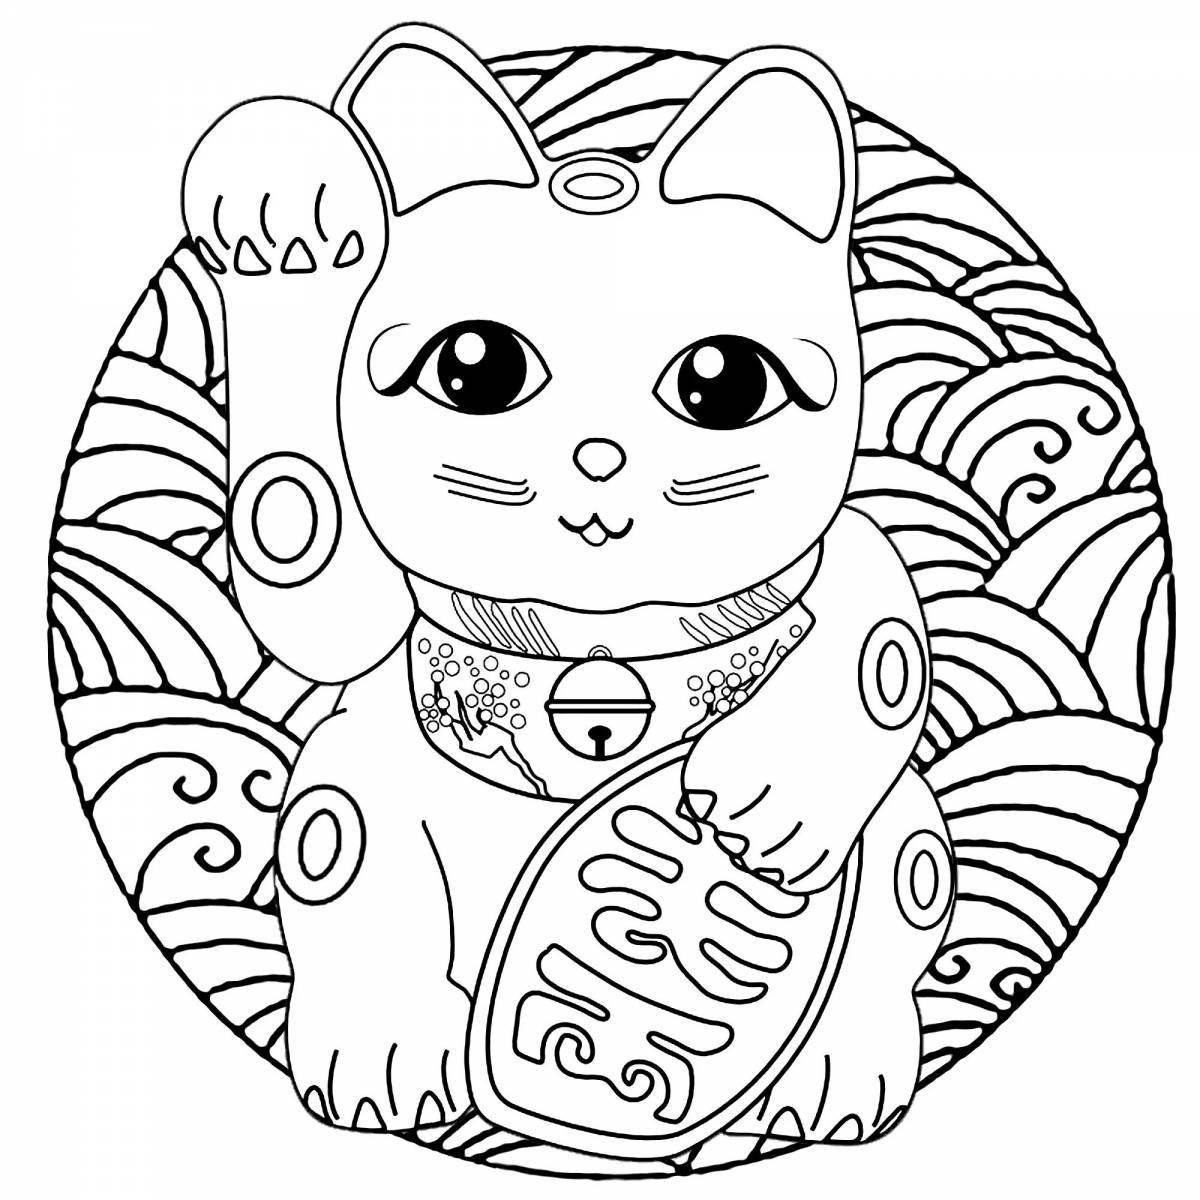 Coloring page funny cat in a cup